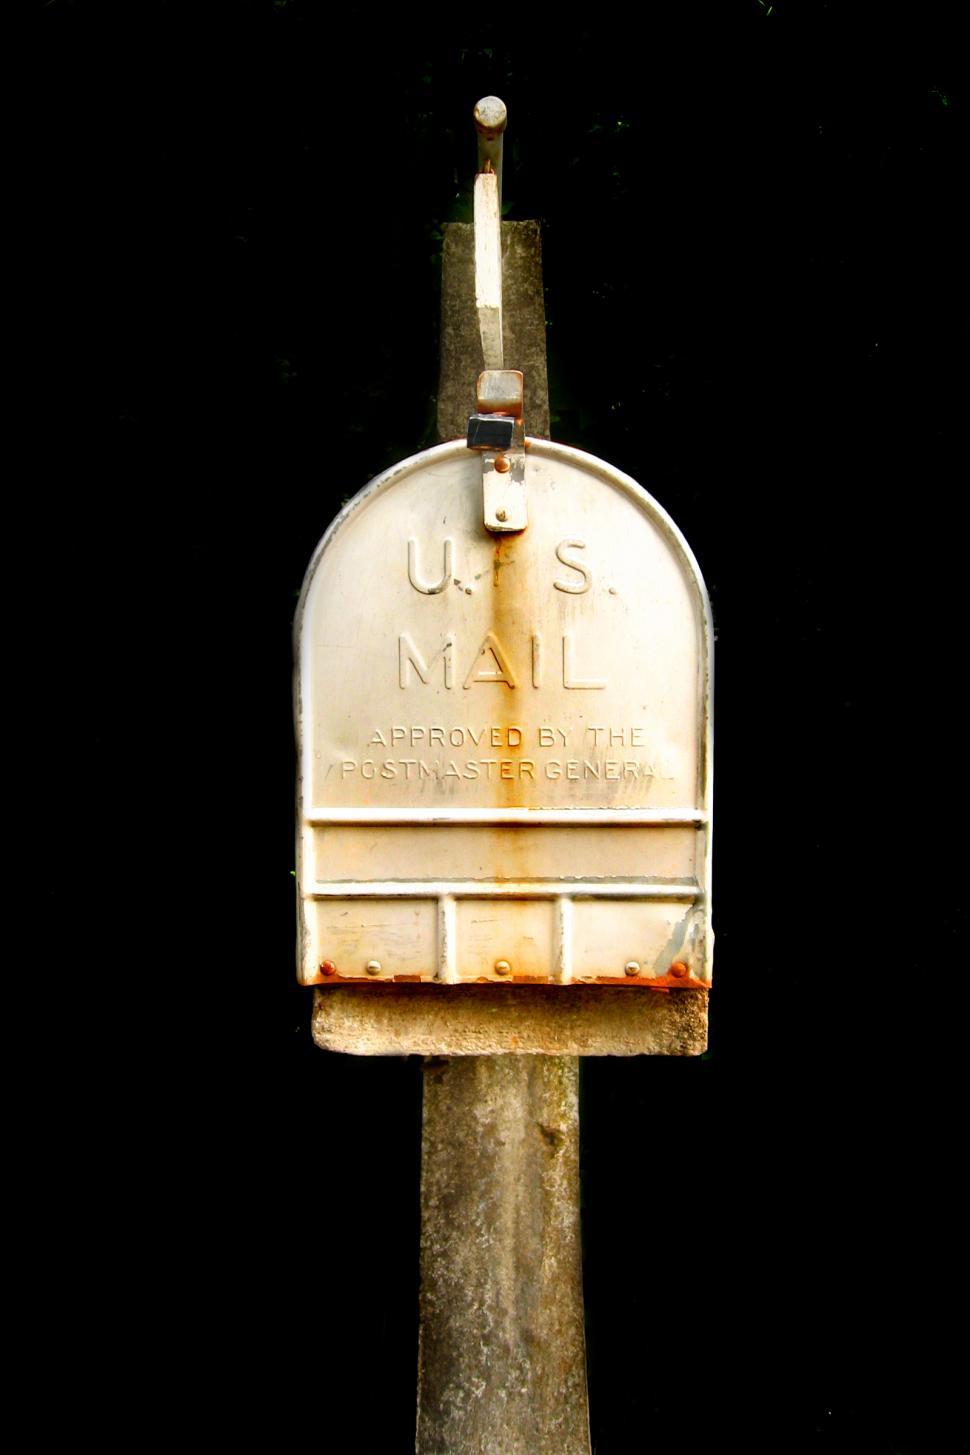 Free Image of Old Mailbox With the Letter U S Mail 